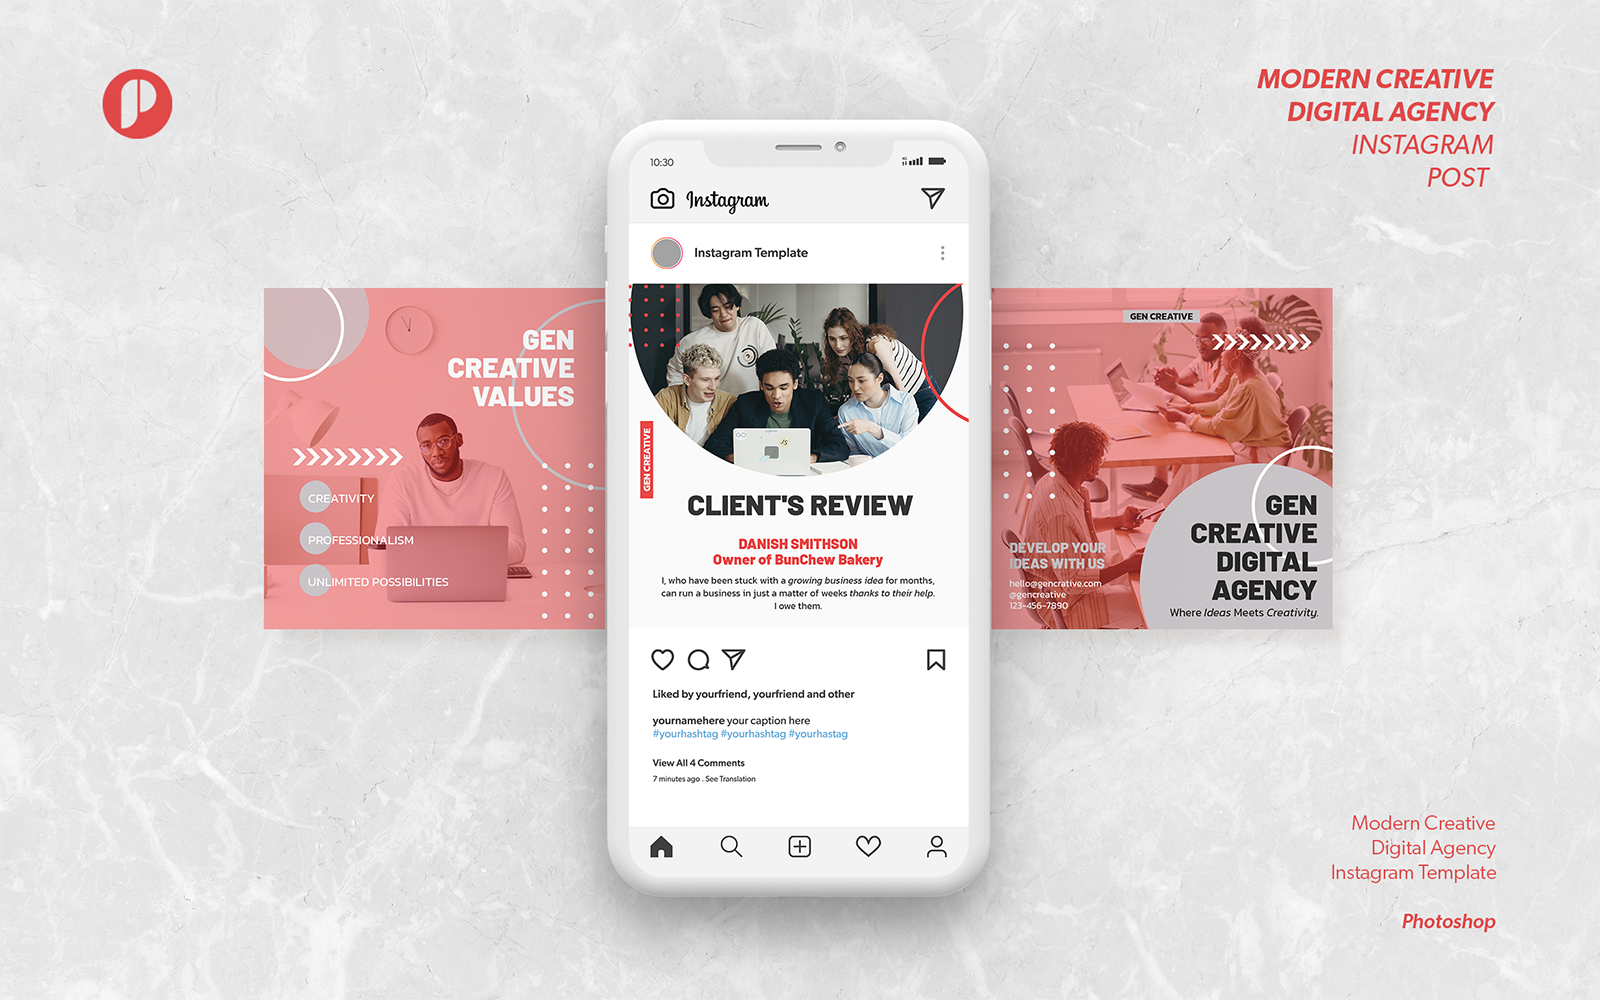 Beauty red and white modern creative digital agency instagram post